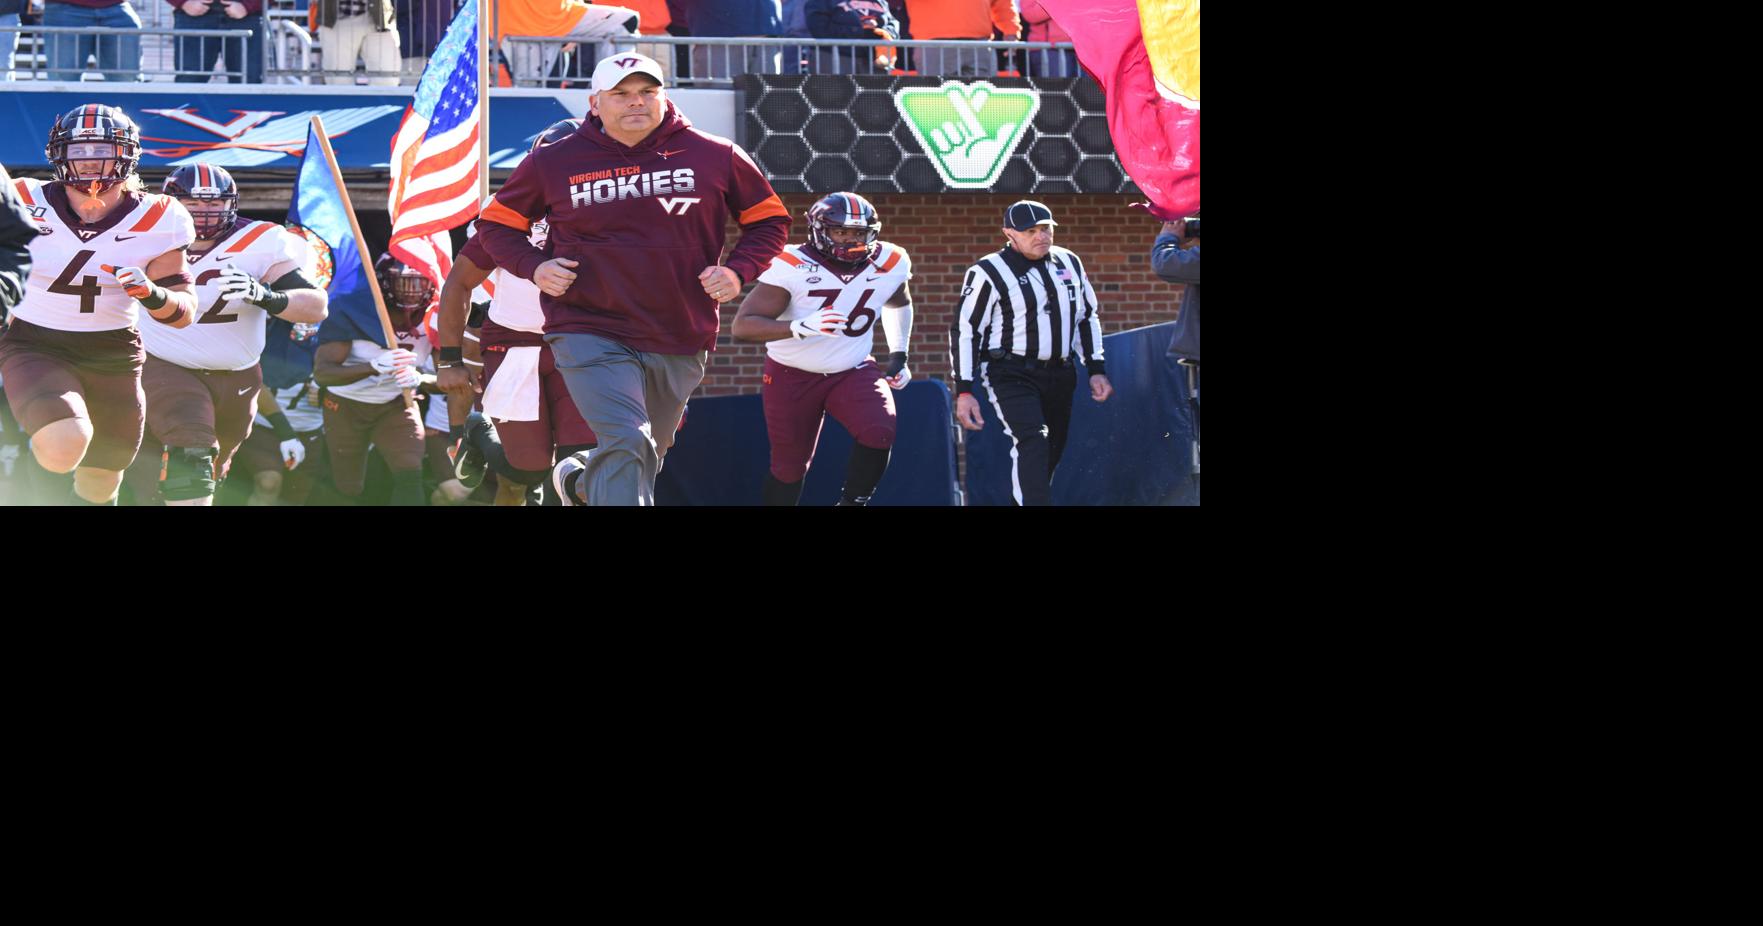 Taking a look at the Hokies’ football schedule Sports